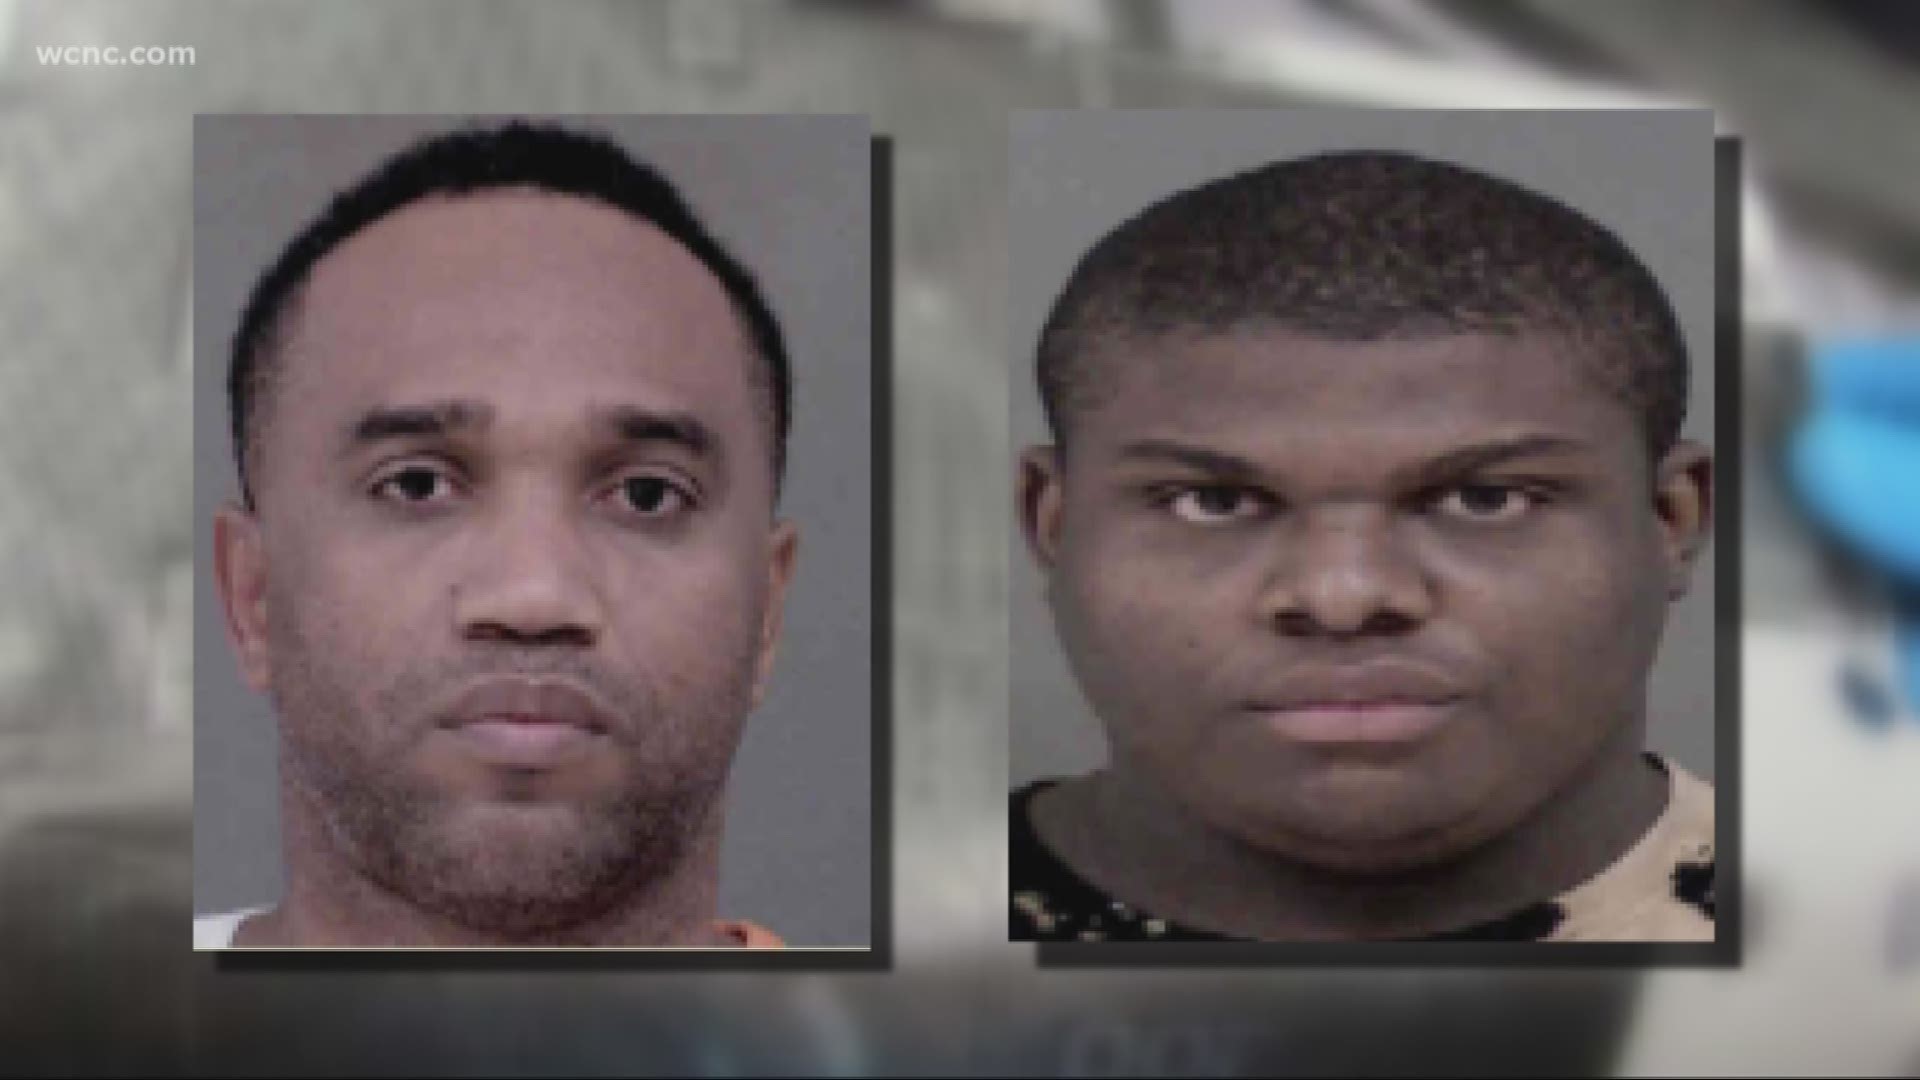 More than six pounds of cocaine were seized from two Jamaican citizens.